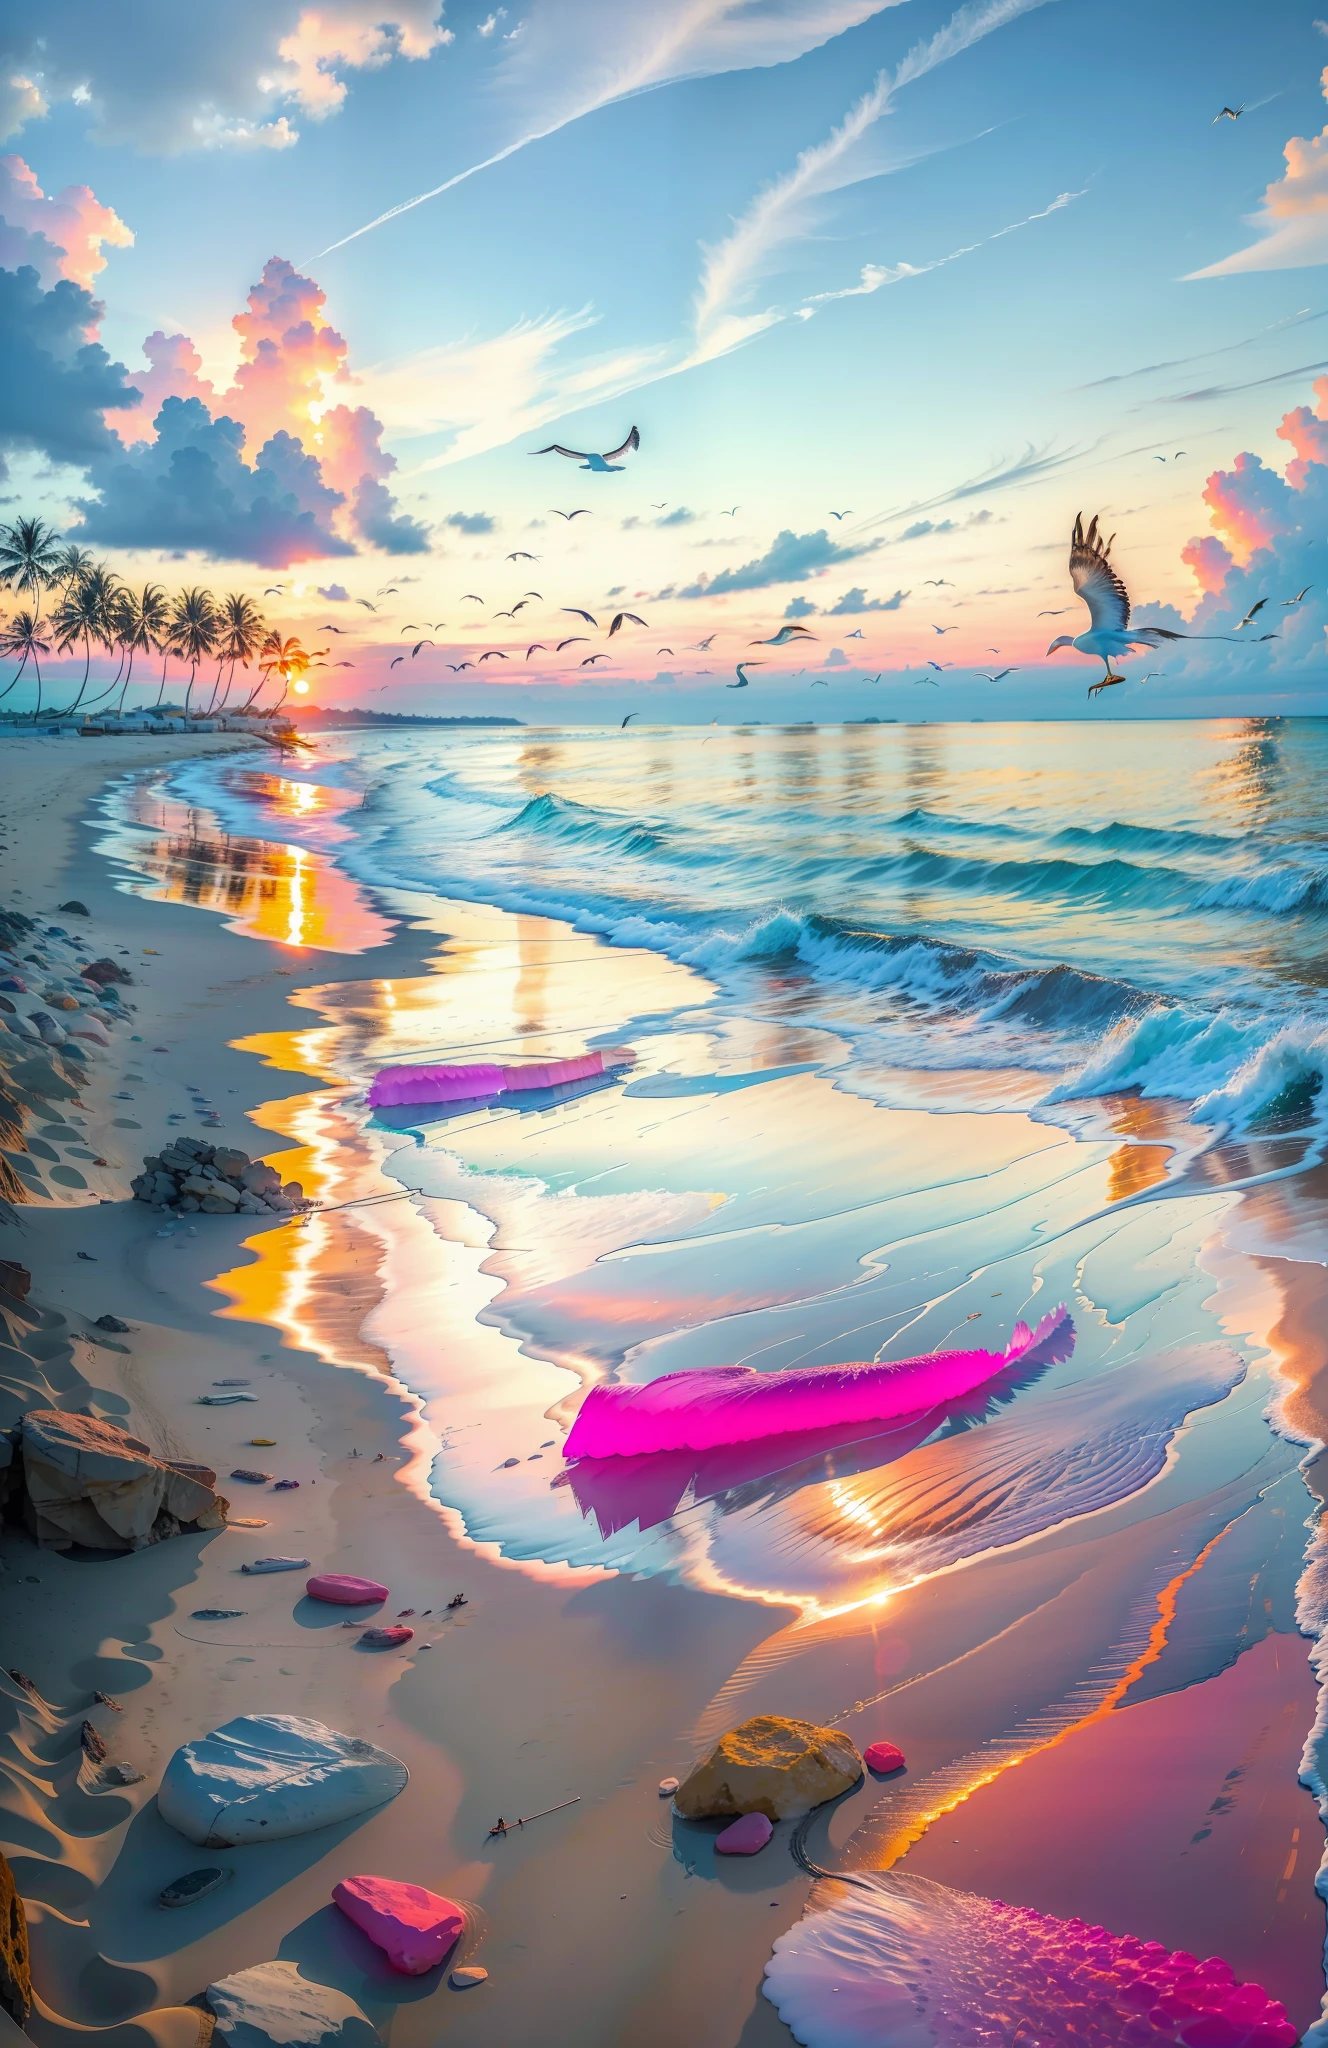 The beach is covered with colorful transparent smooth stones: 1.5, an absolutely mesmerizing sunset on the beach with a mix of orange, pink and yellow in the sky. The water is crystal clear, gently kissing the shore, and the white sand beach stretches as far as the eye can see. The scene is dynamic and breathtaking, with seagulls soaring high in the sky and palm trees gently swaying. Soak up the calming atmosphere and let tranquility envelop you.